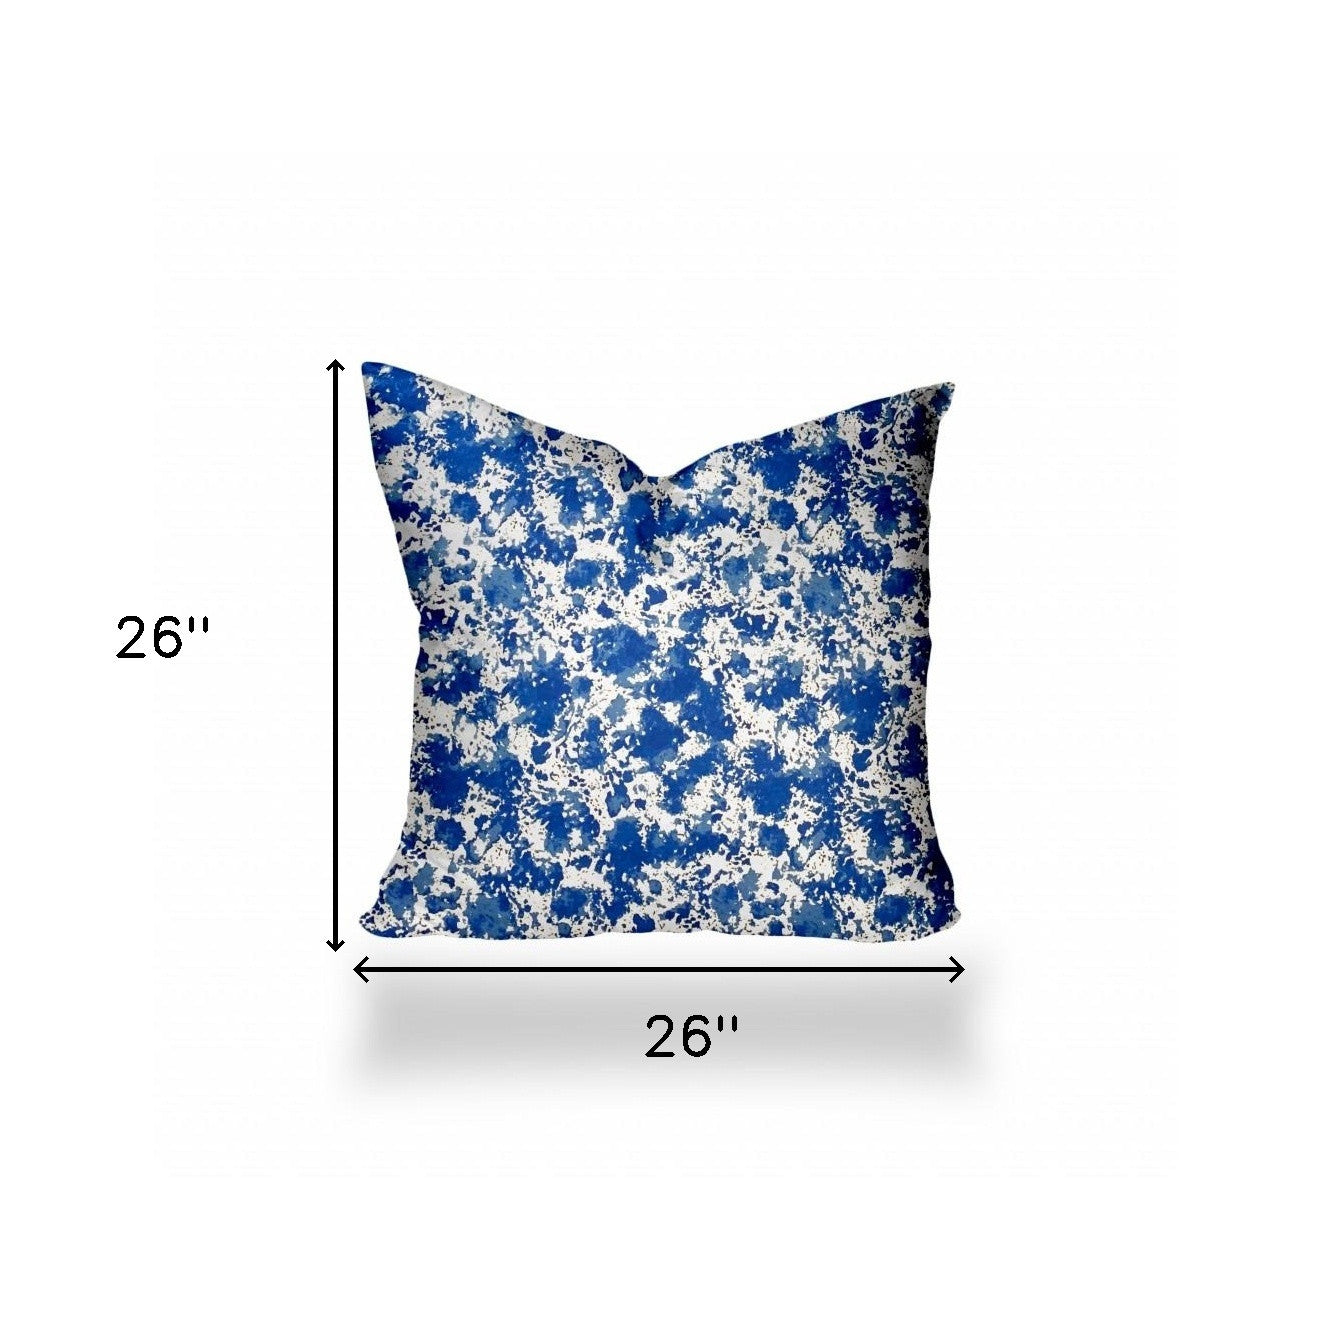 26" X 26" Blue And White Zippered Coastal Throw Indoor Outdoor Pillow Cover